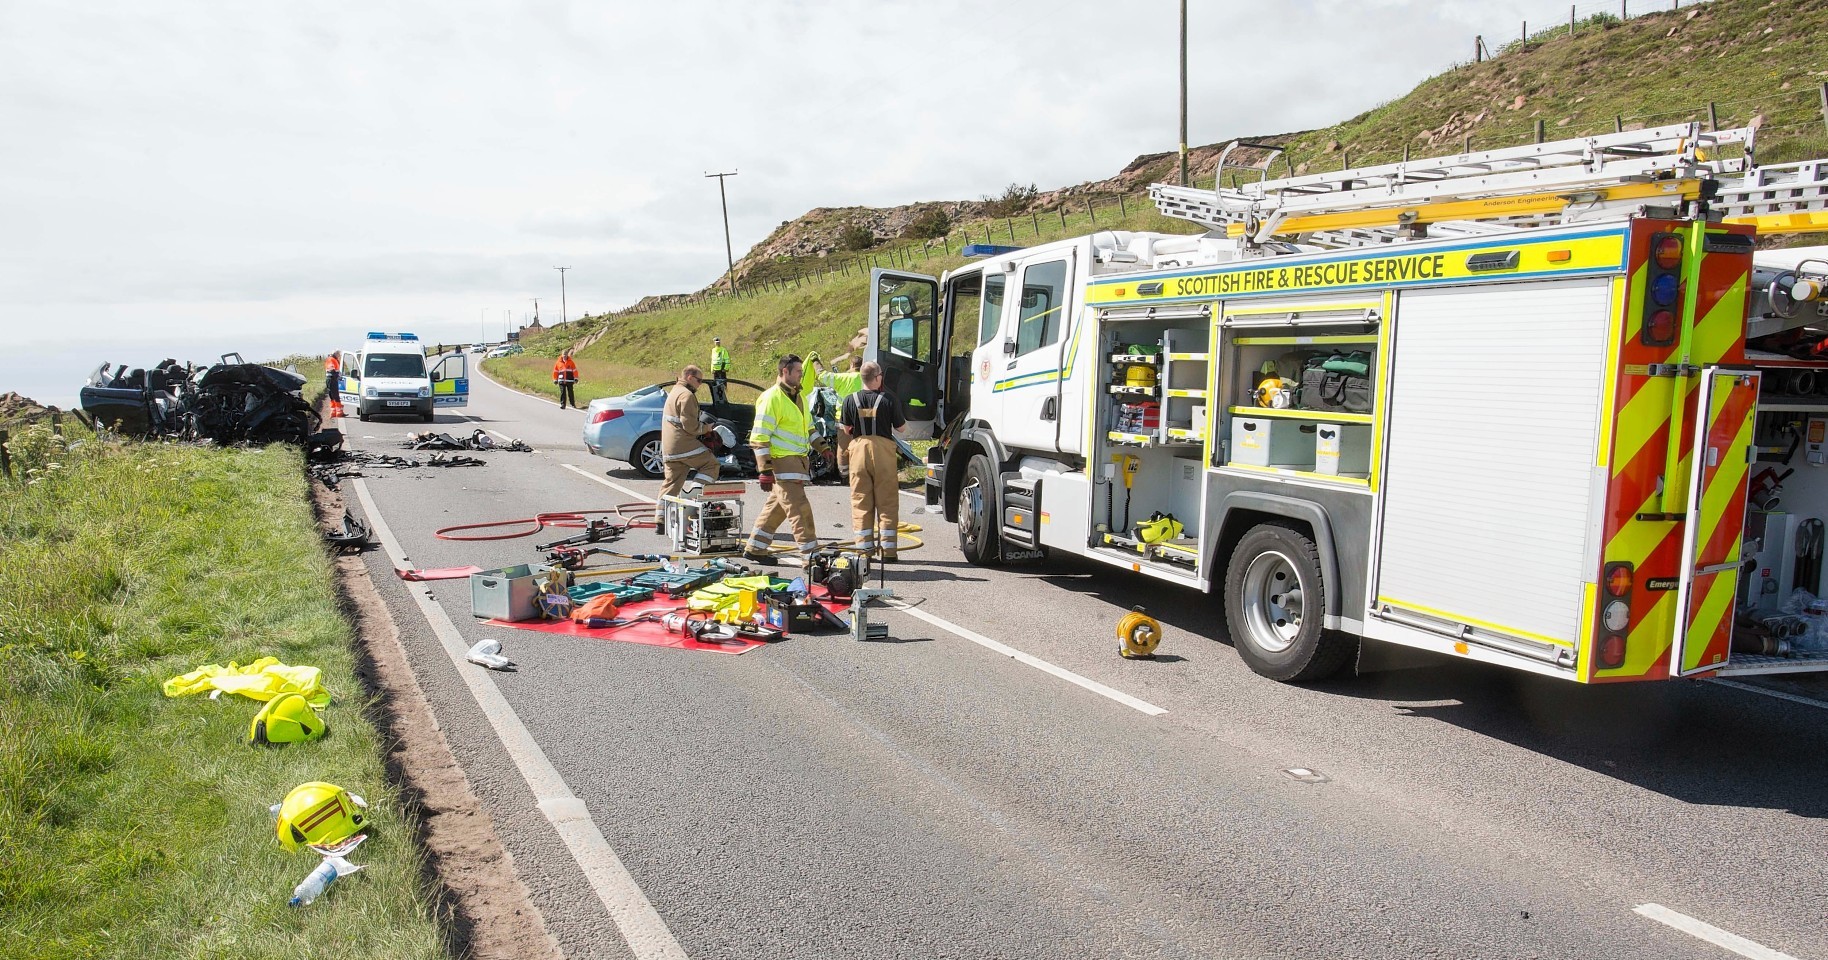 Rescue crews working at the scene of the A90 crash near Peterhead